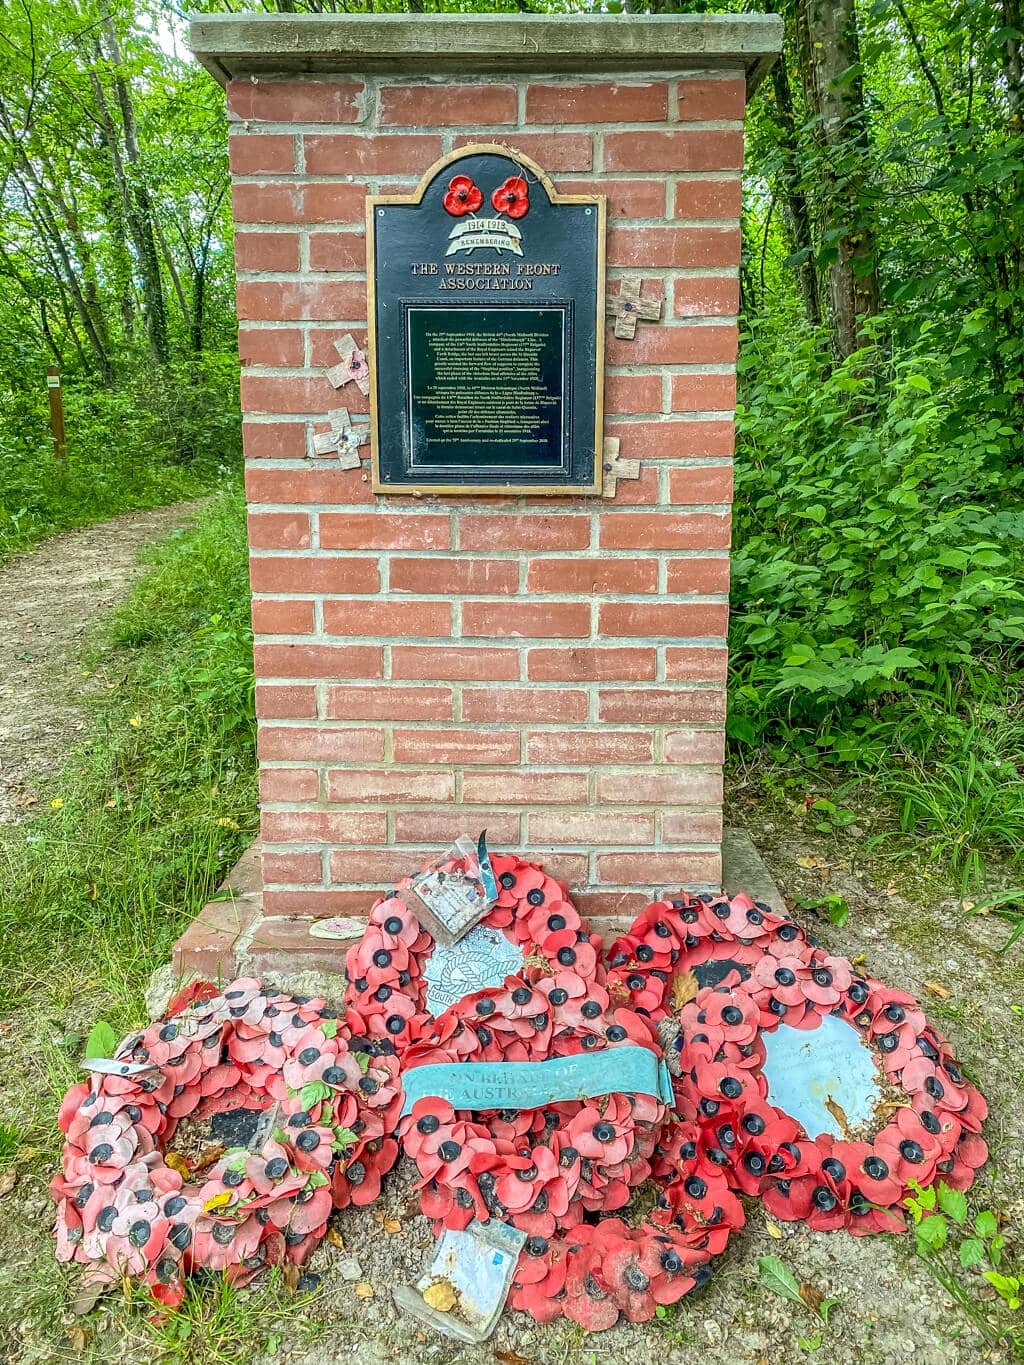 red brick memorial with plaque but words are too small to be read, there are wreaths of poppies in front of it.